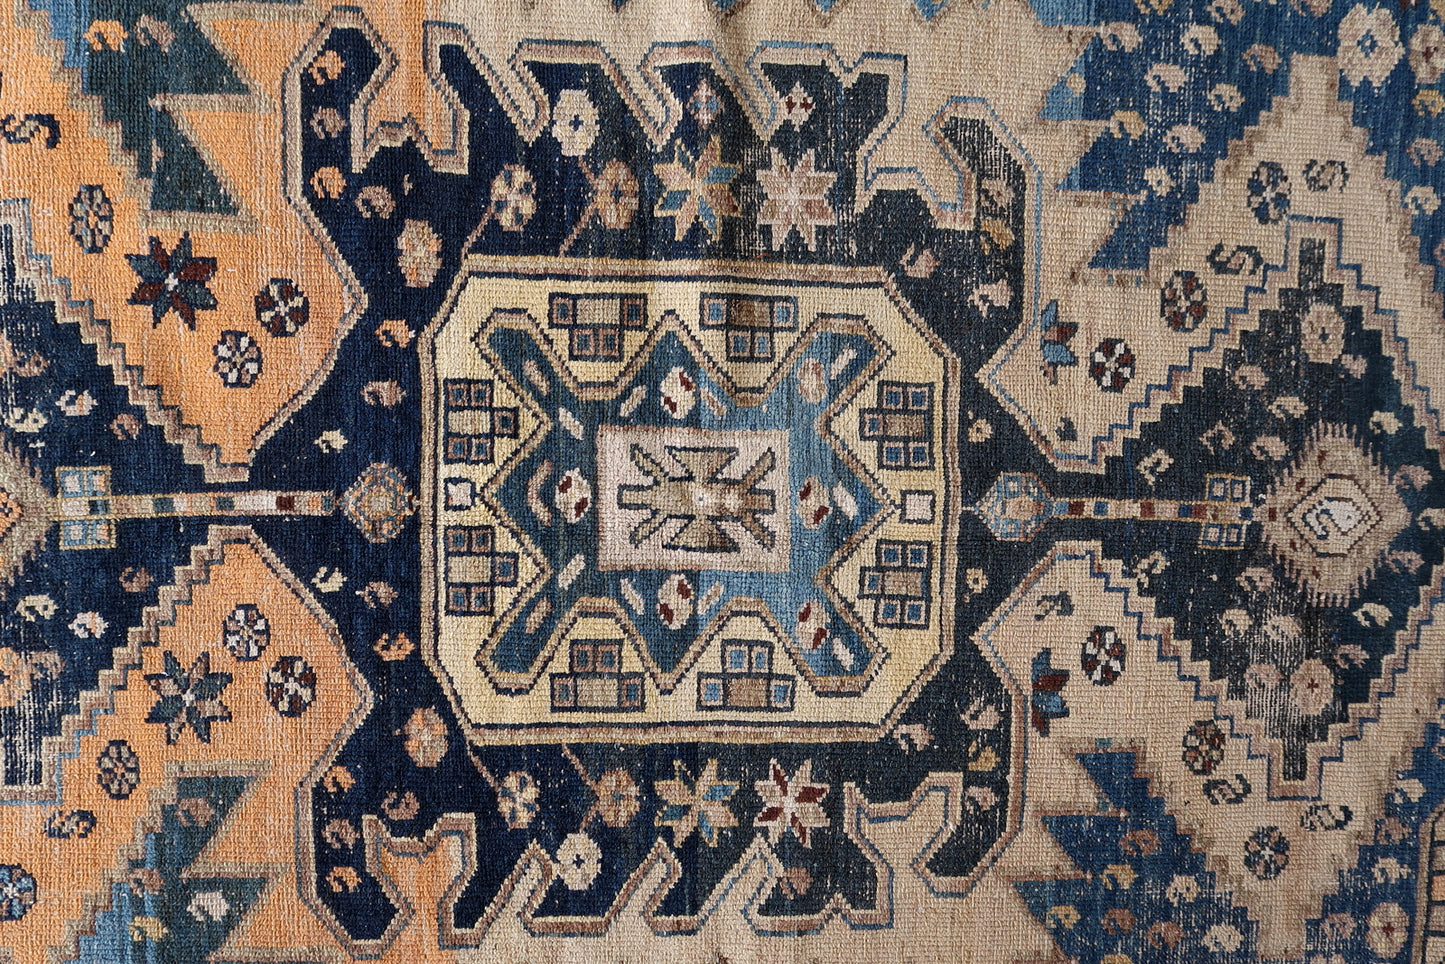 Close-up of wool material on Handmade Antique Caucasian Shirvan Rug - Detailed view showcasing the handcrafted wool material for durability and comfort.